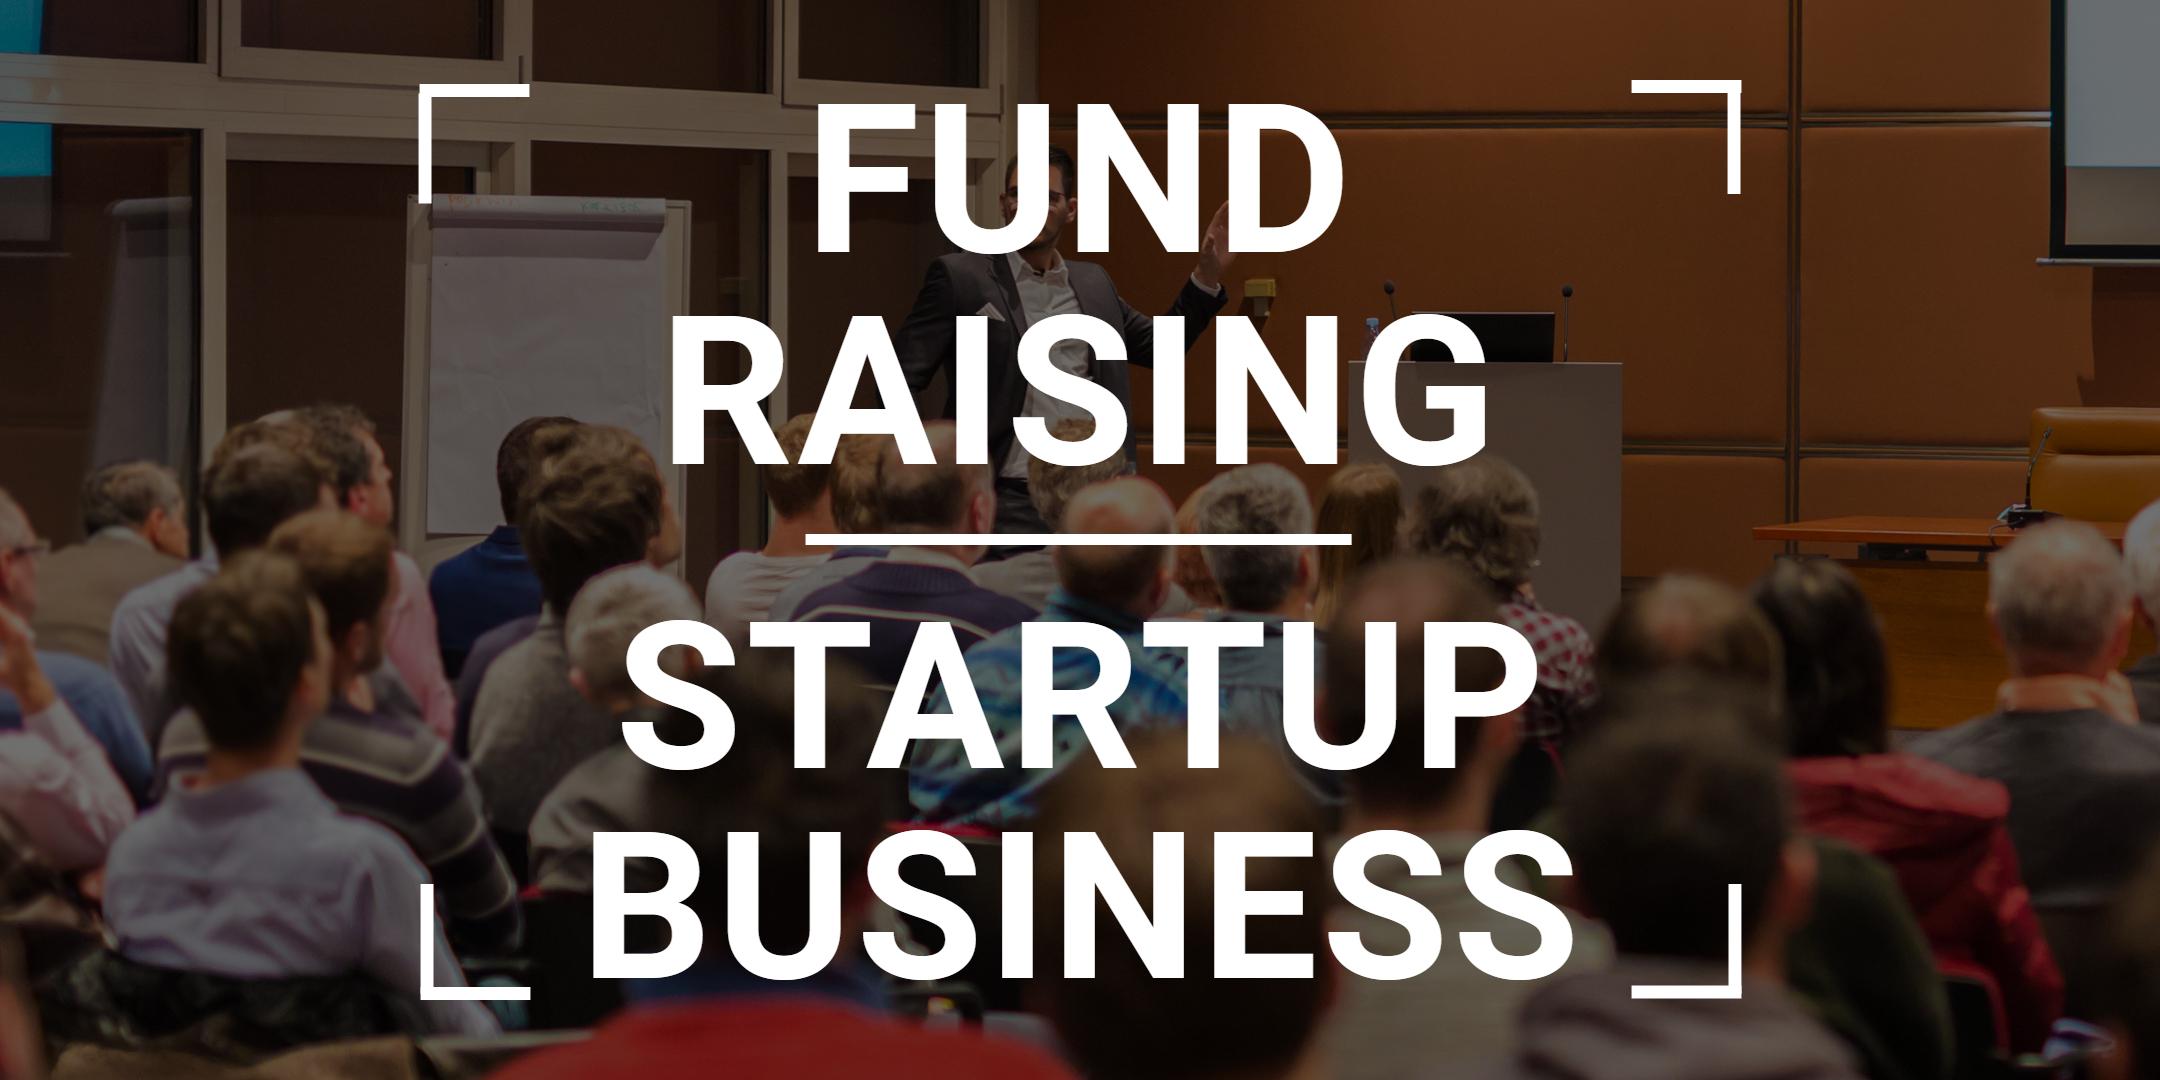 Fund Raising for Startup Business